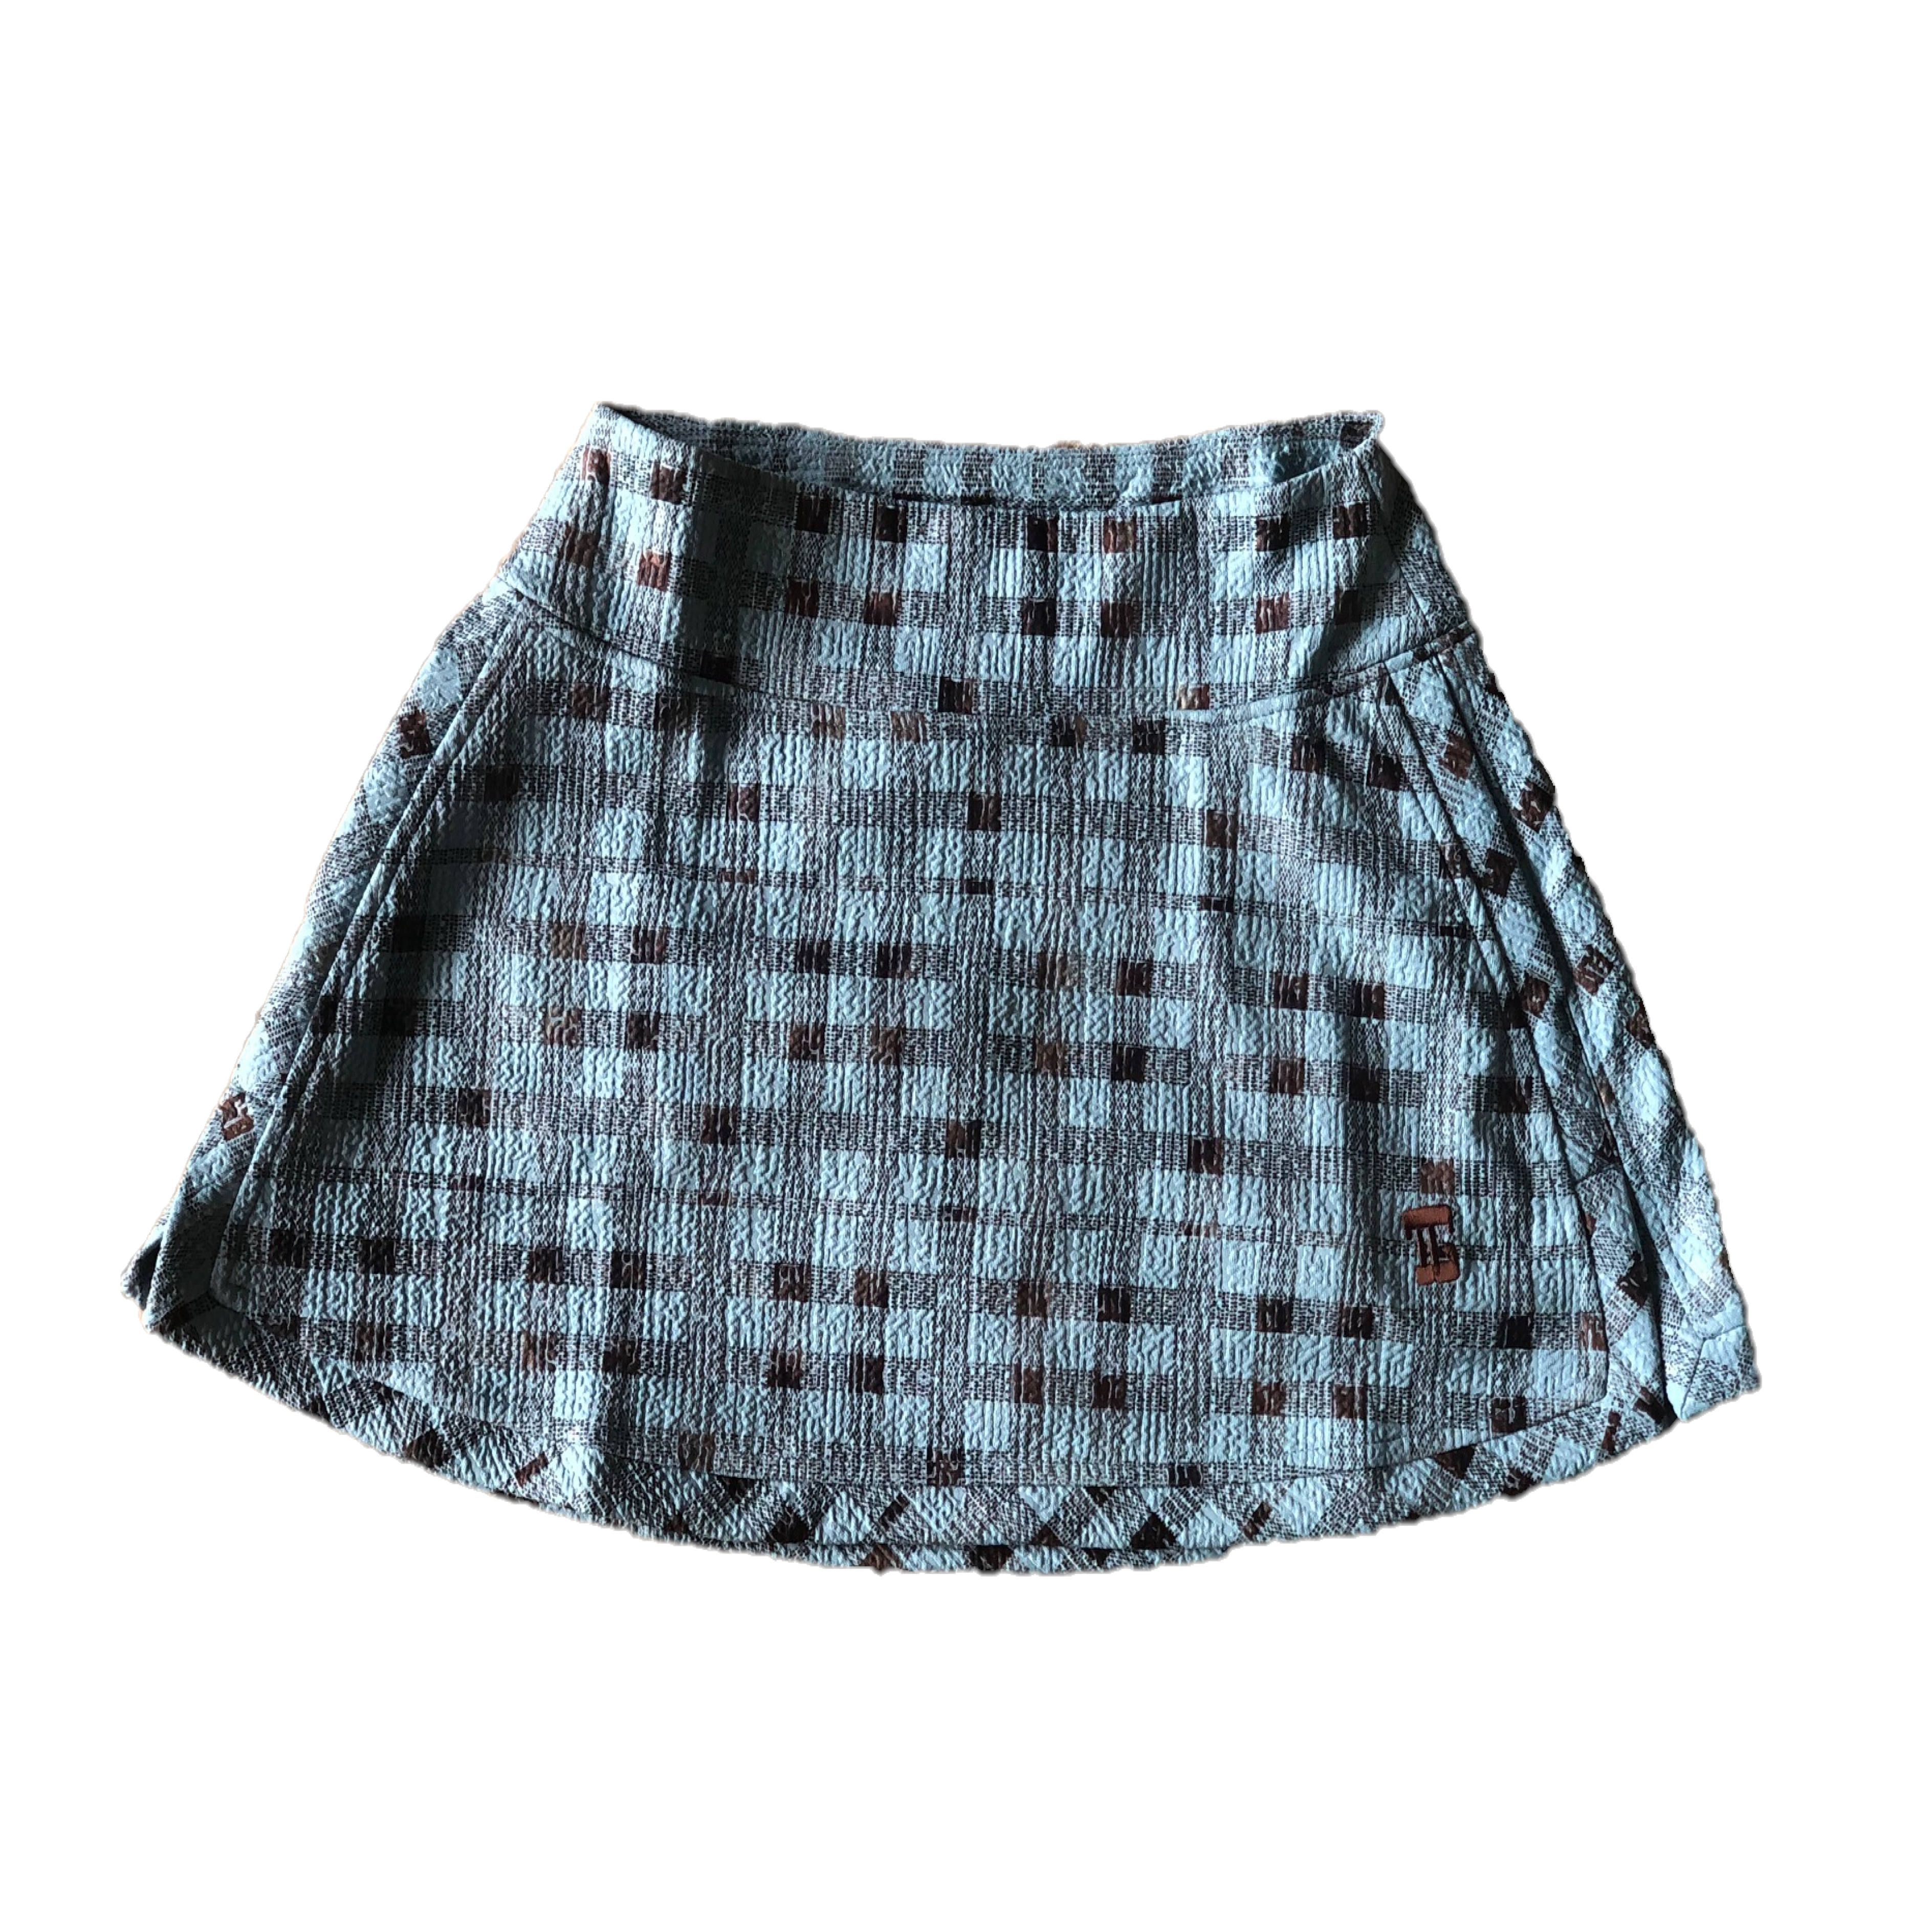 LS-041D || Ladies Skirt Wrap Around Blue With Black & Grey Check A Line Model